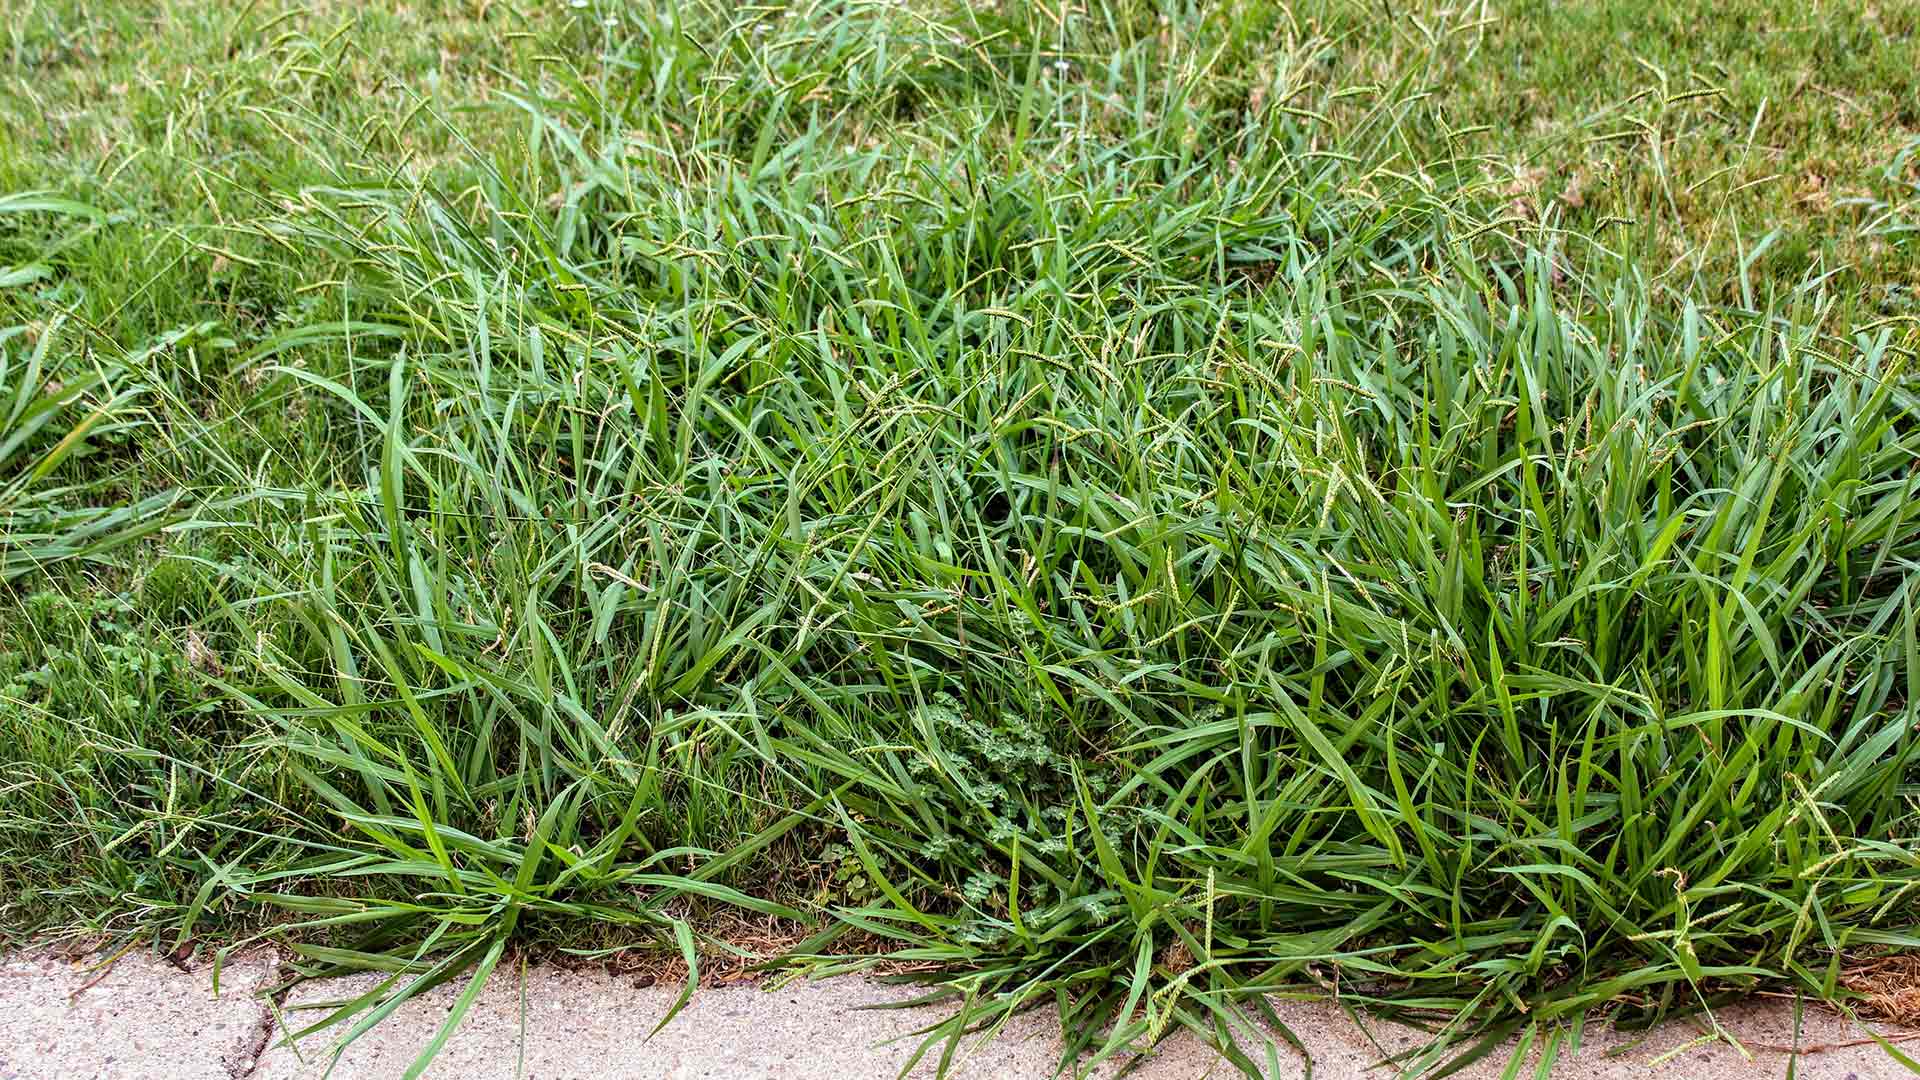 Identifying Dallisgrass and how to kill it